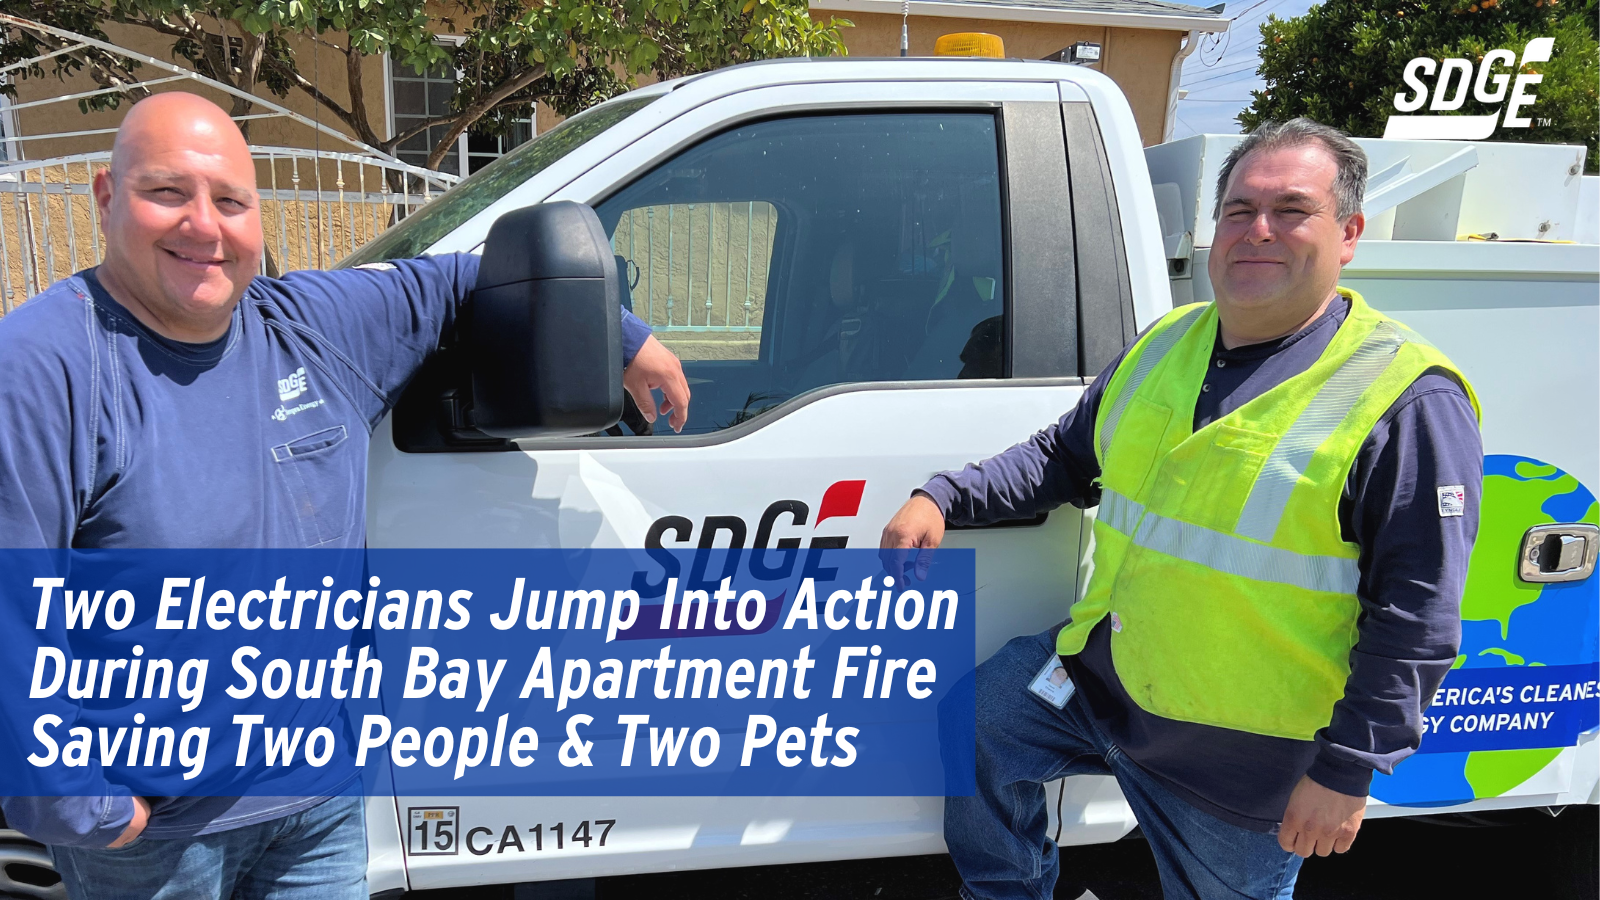 Two Electricians Jump Into Action During South Bay Apartment Fire Saving Two People and Two Pets